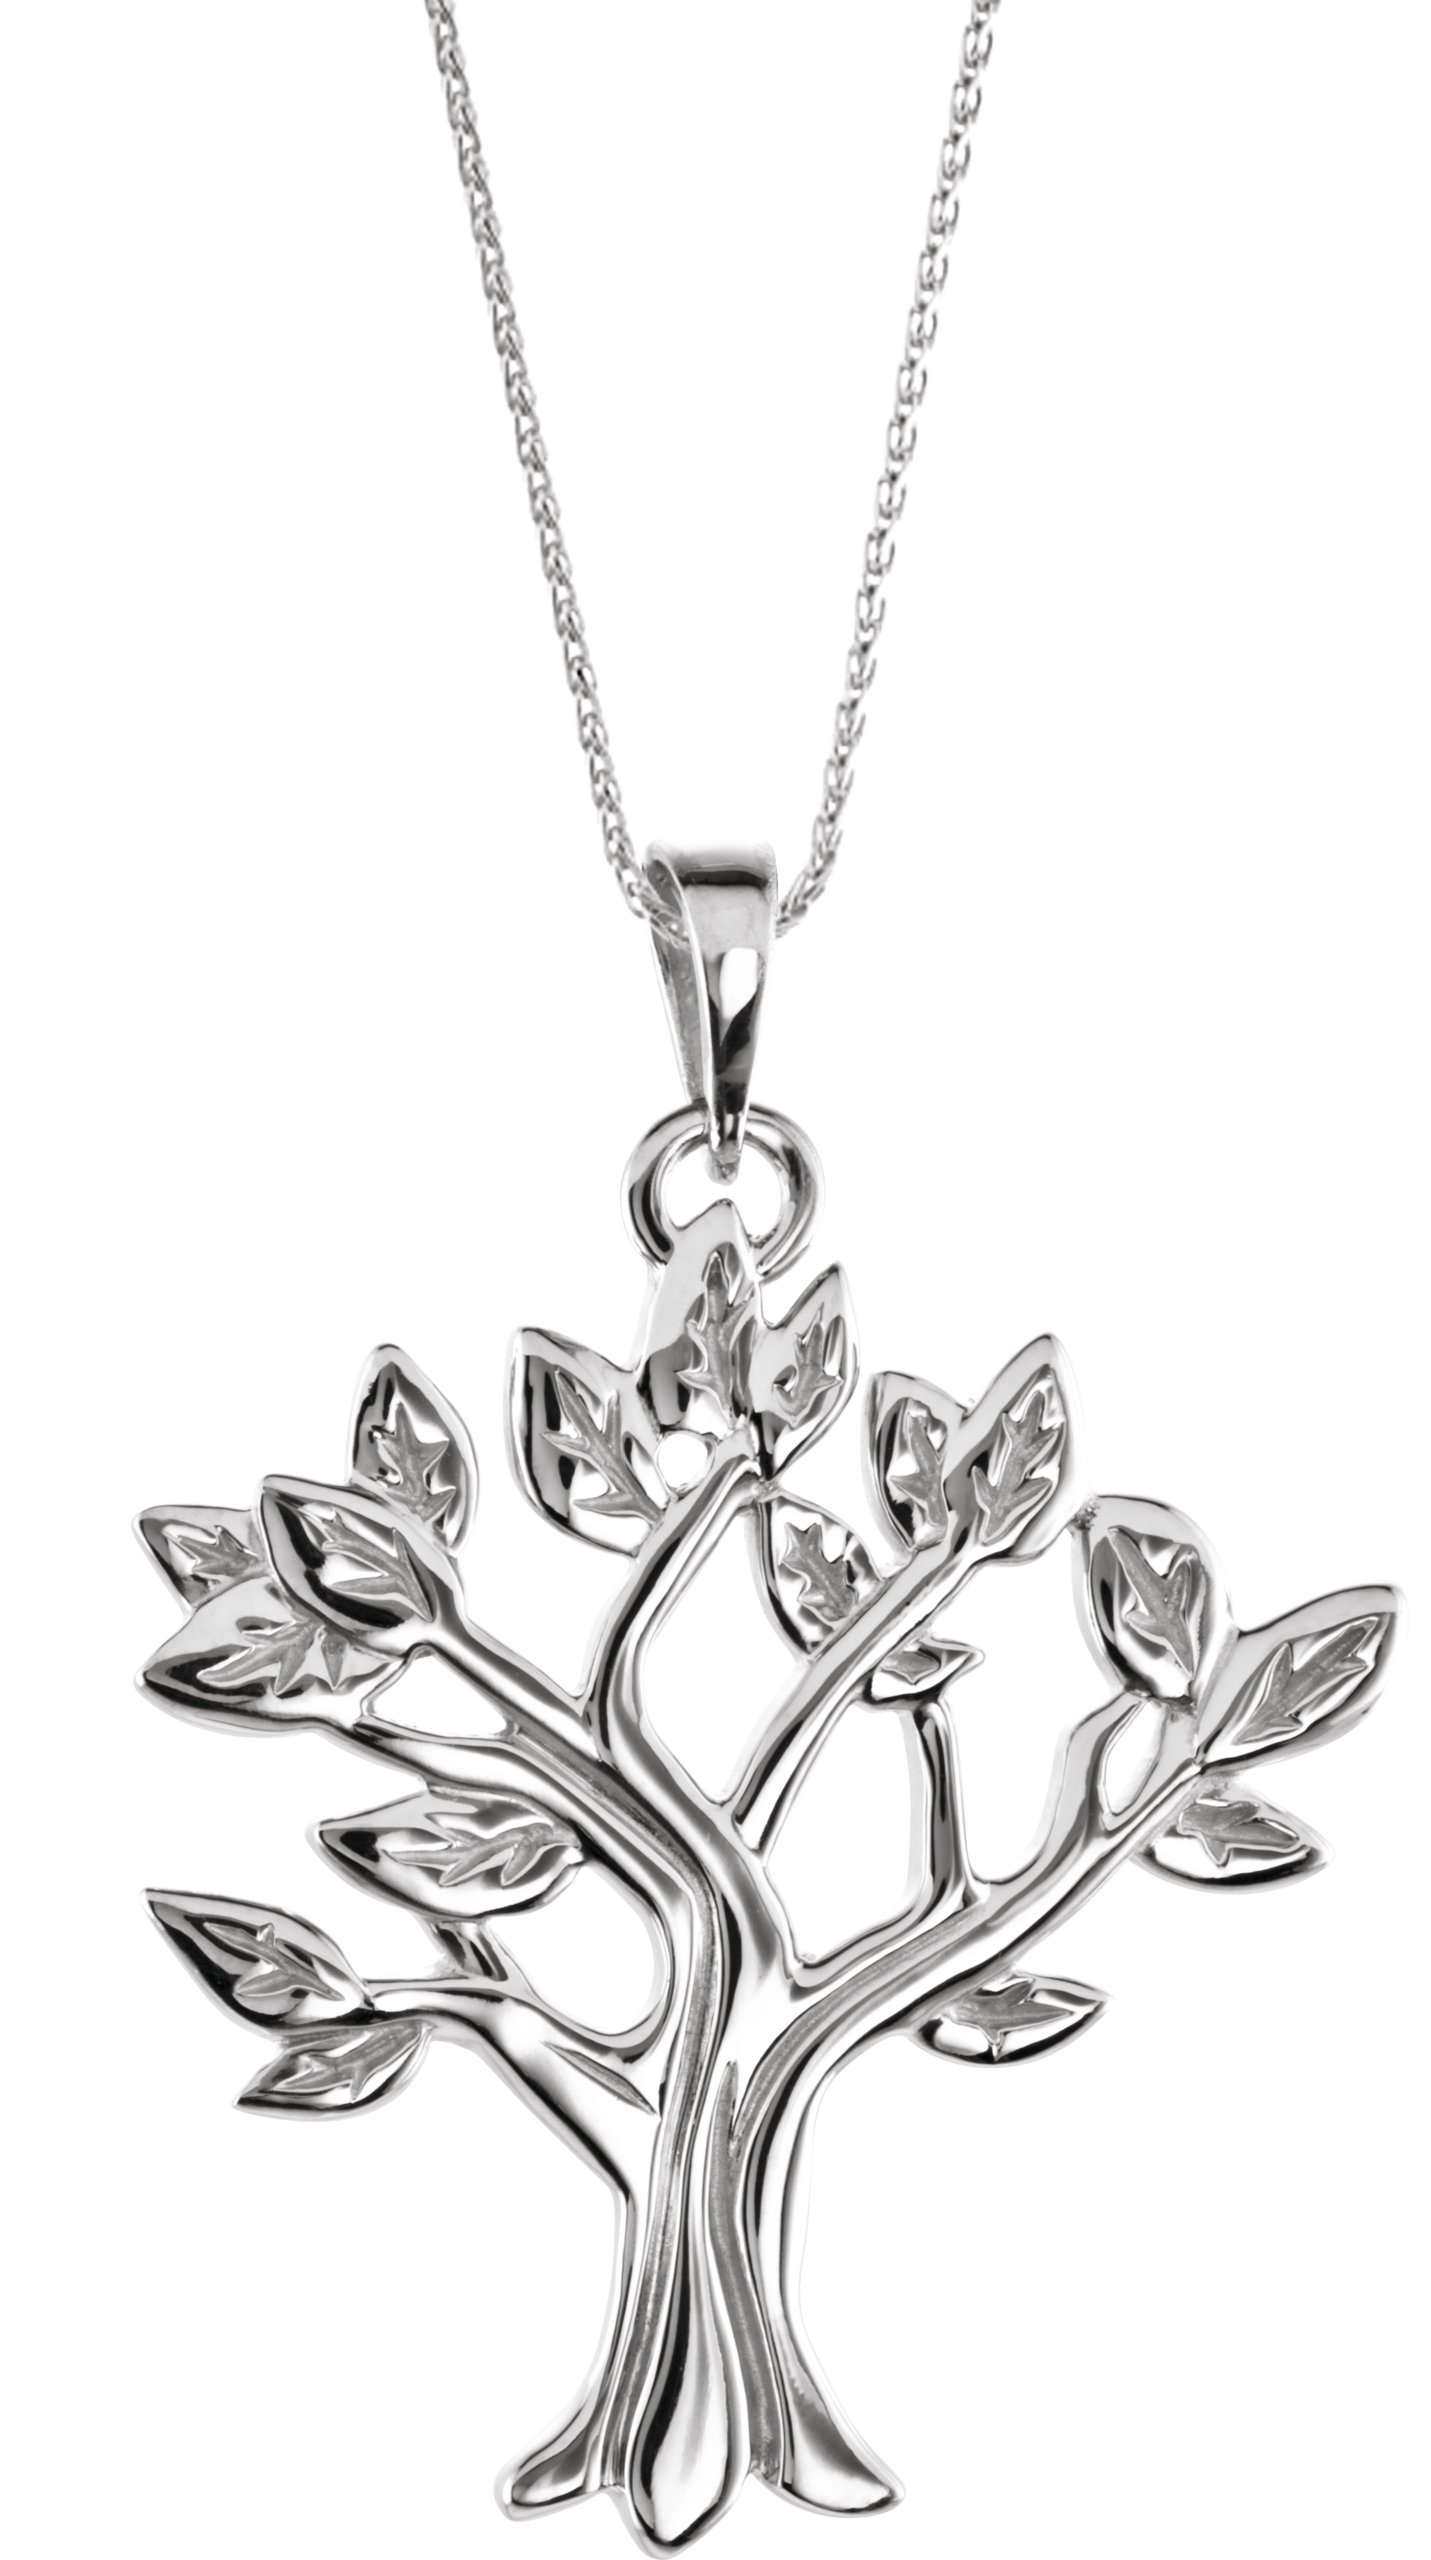 14K White My Tree Family 16 18 inch Necklace Ref. 16681634